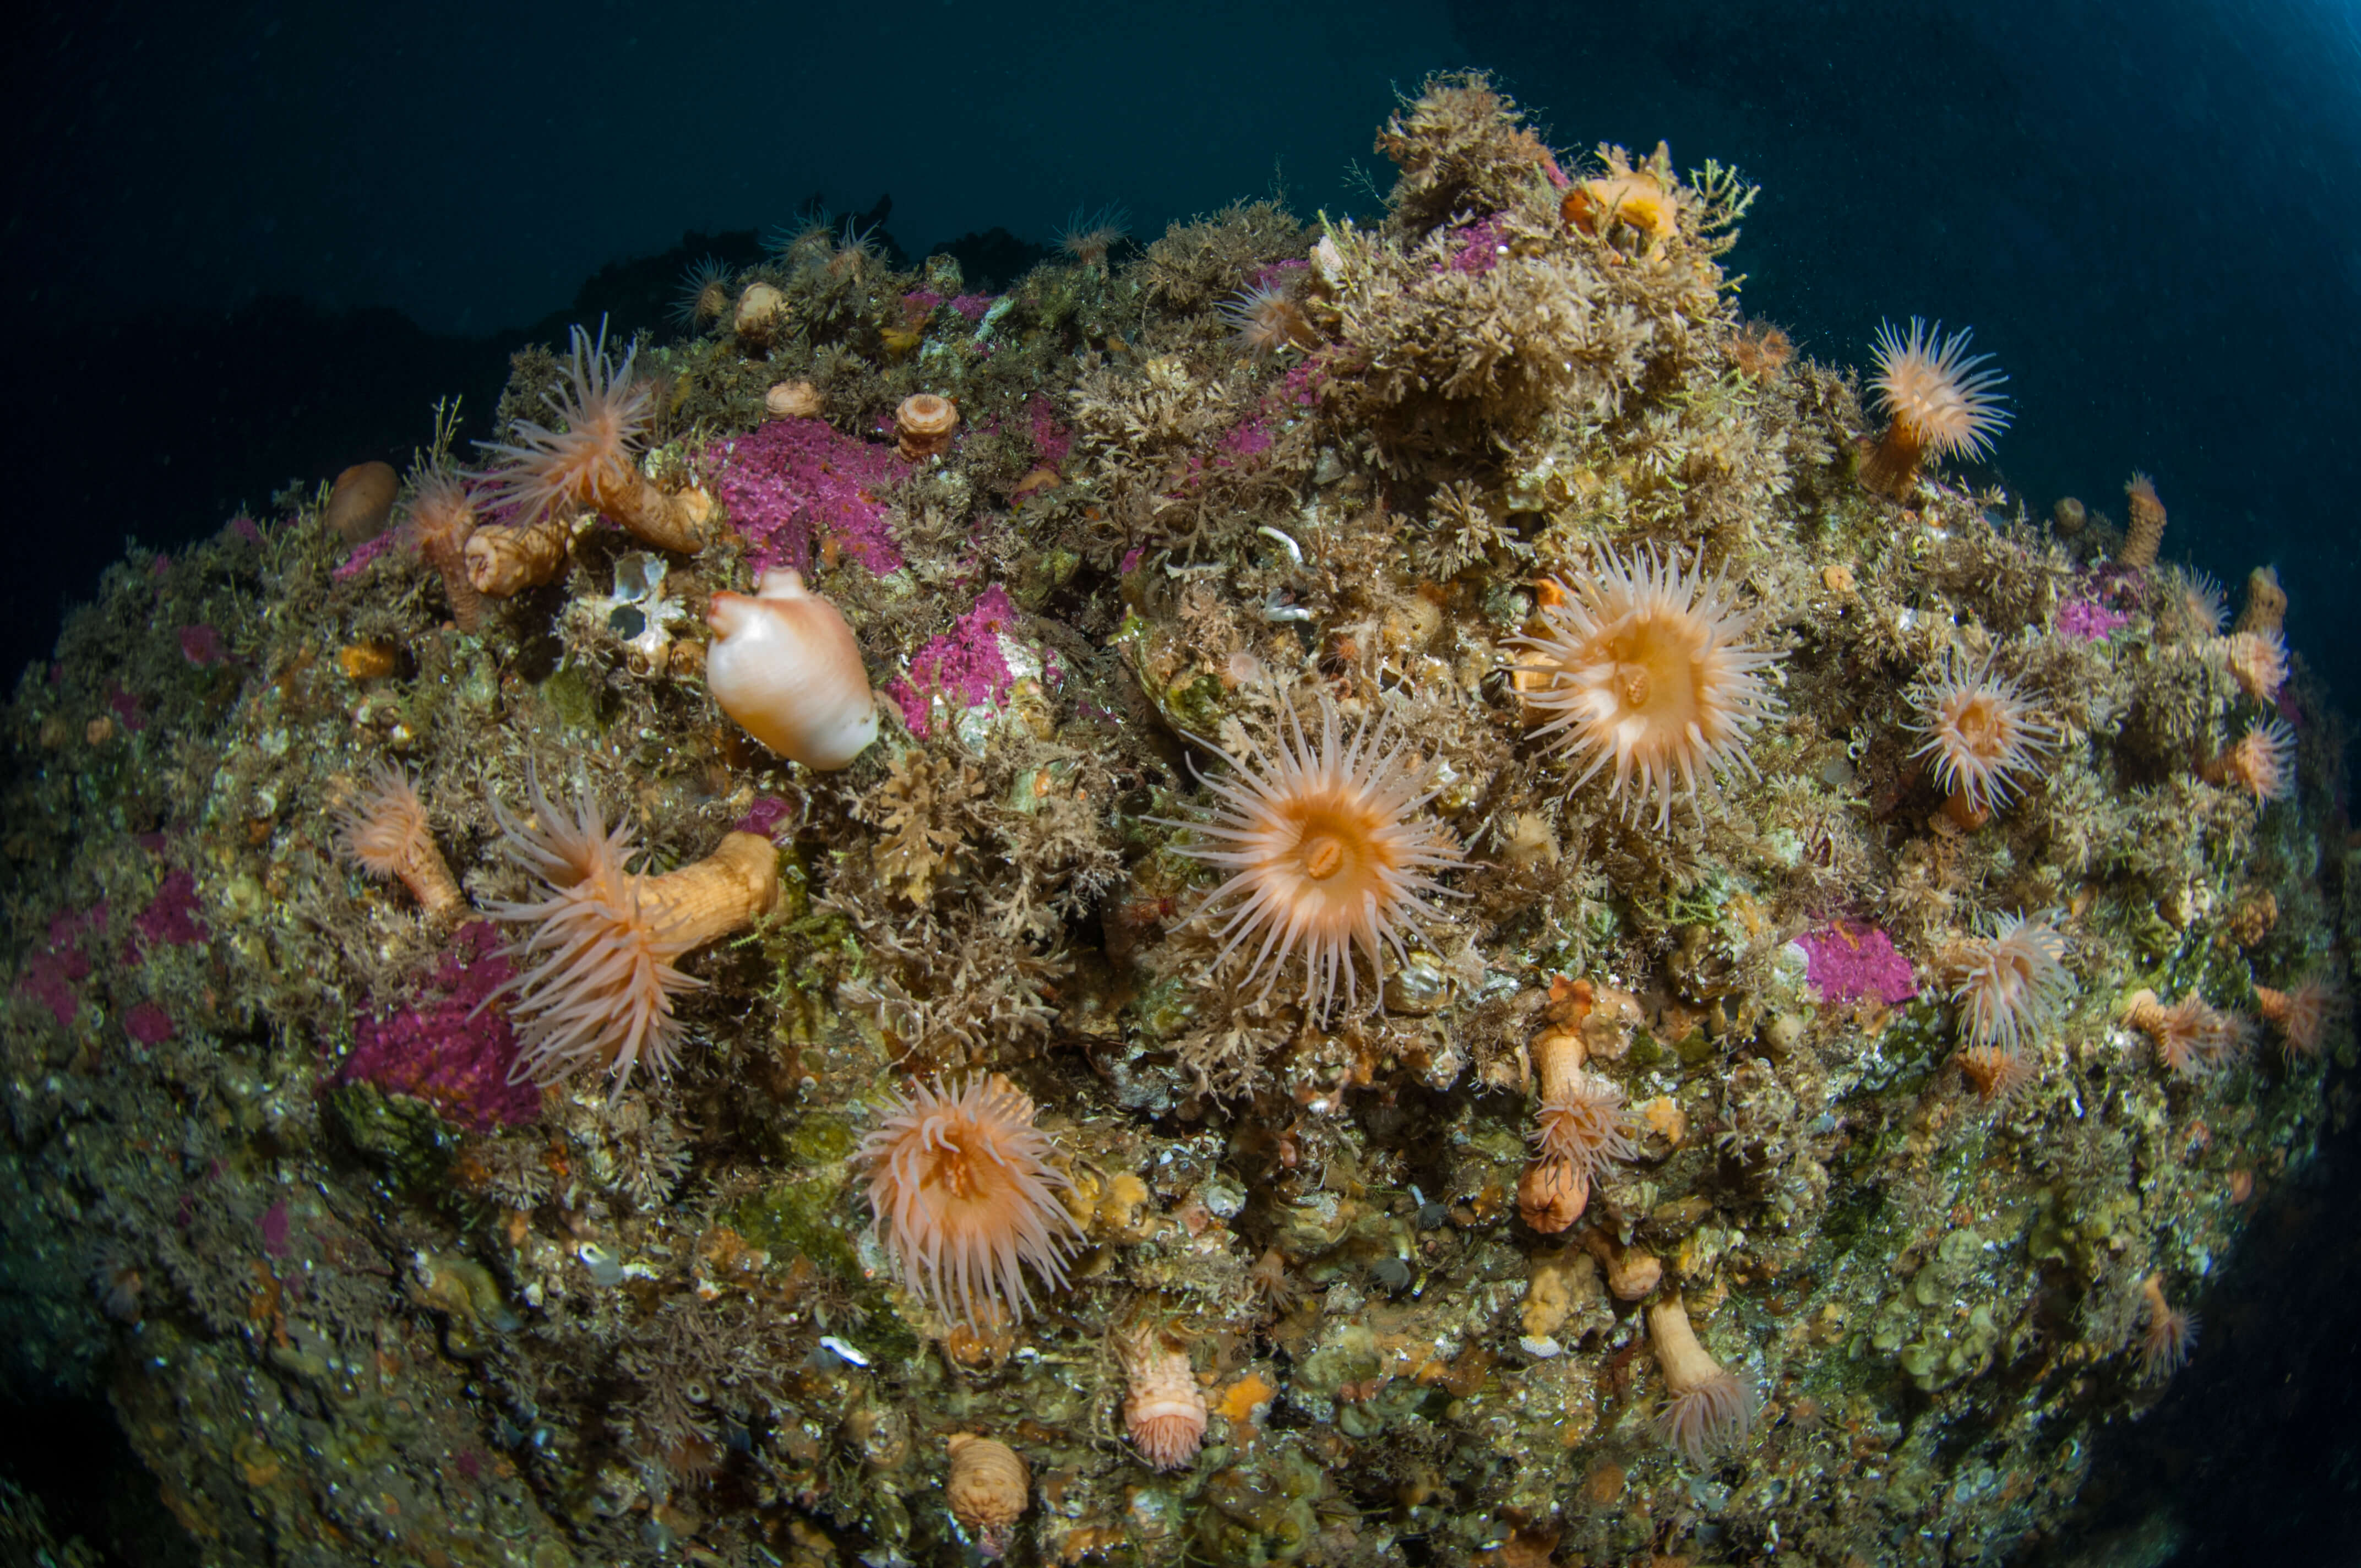 Overview of Benthic Organisms